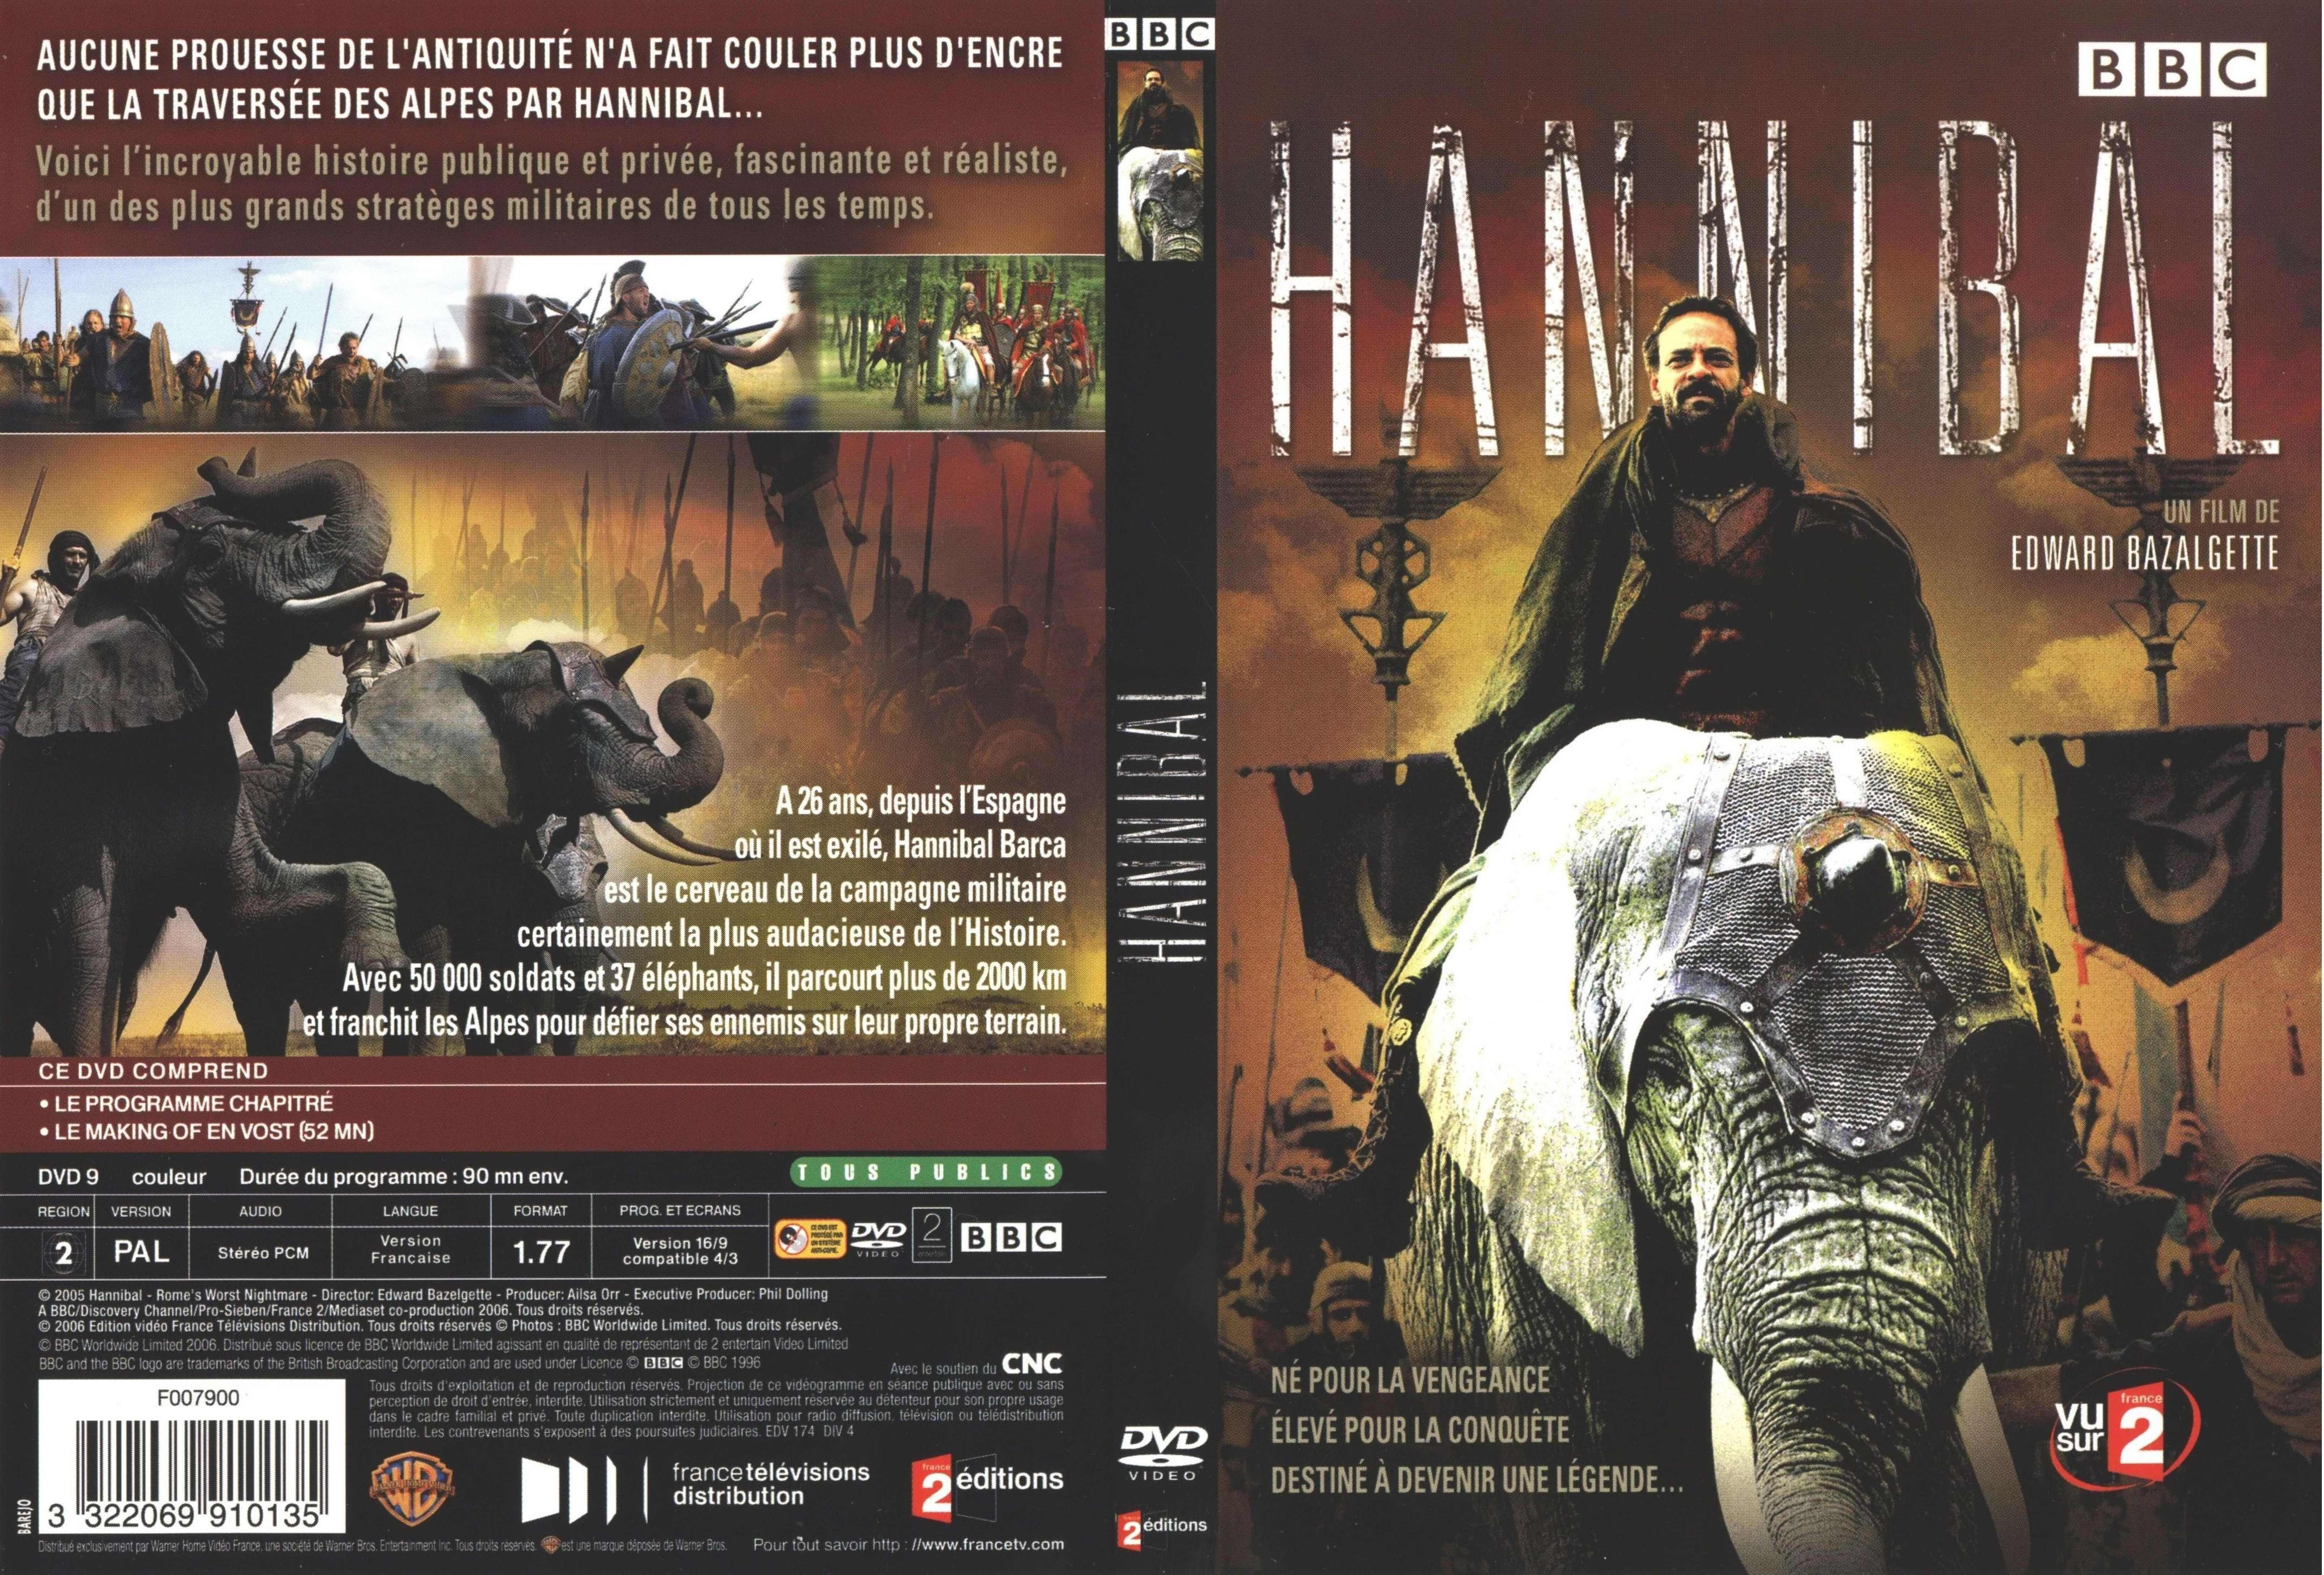 Jaquette DVD Hannibal (documentaire)